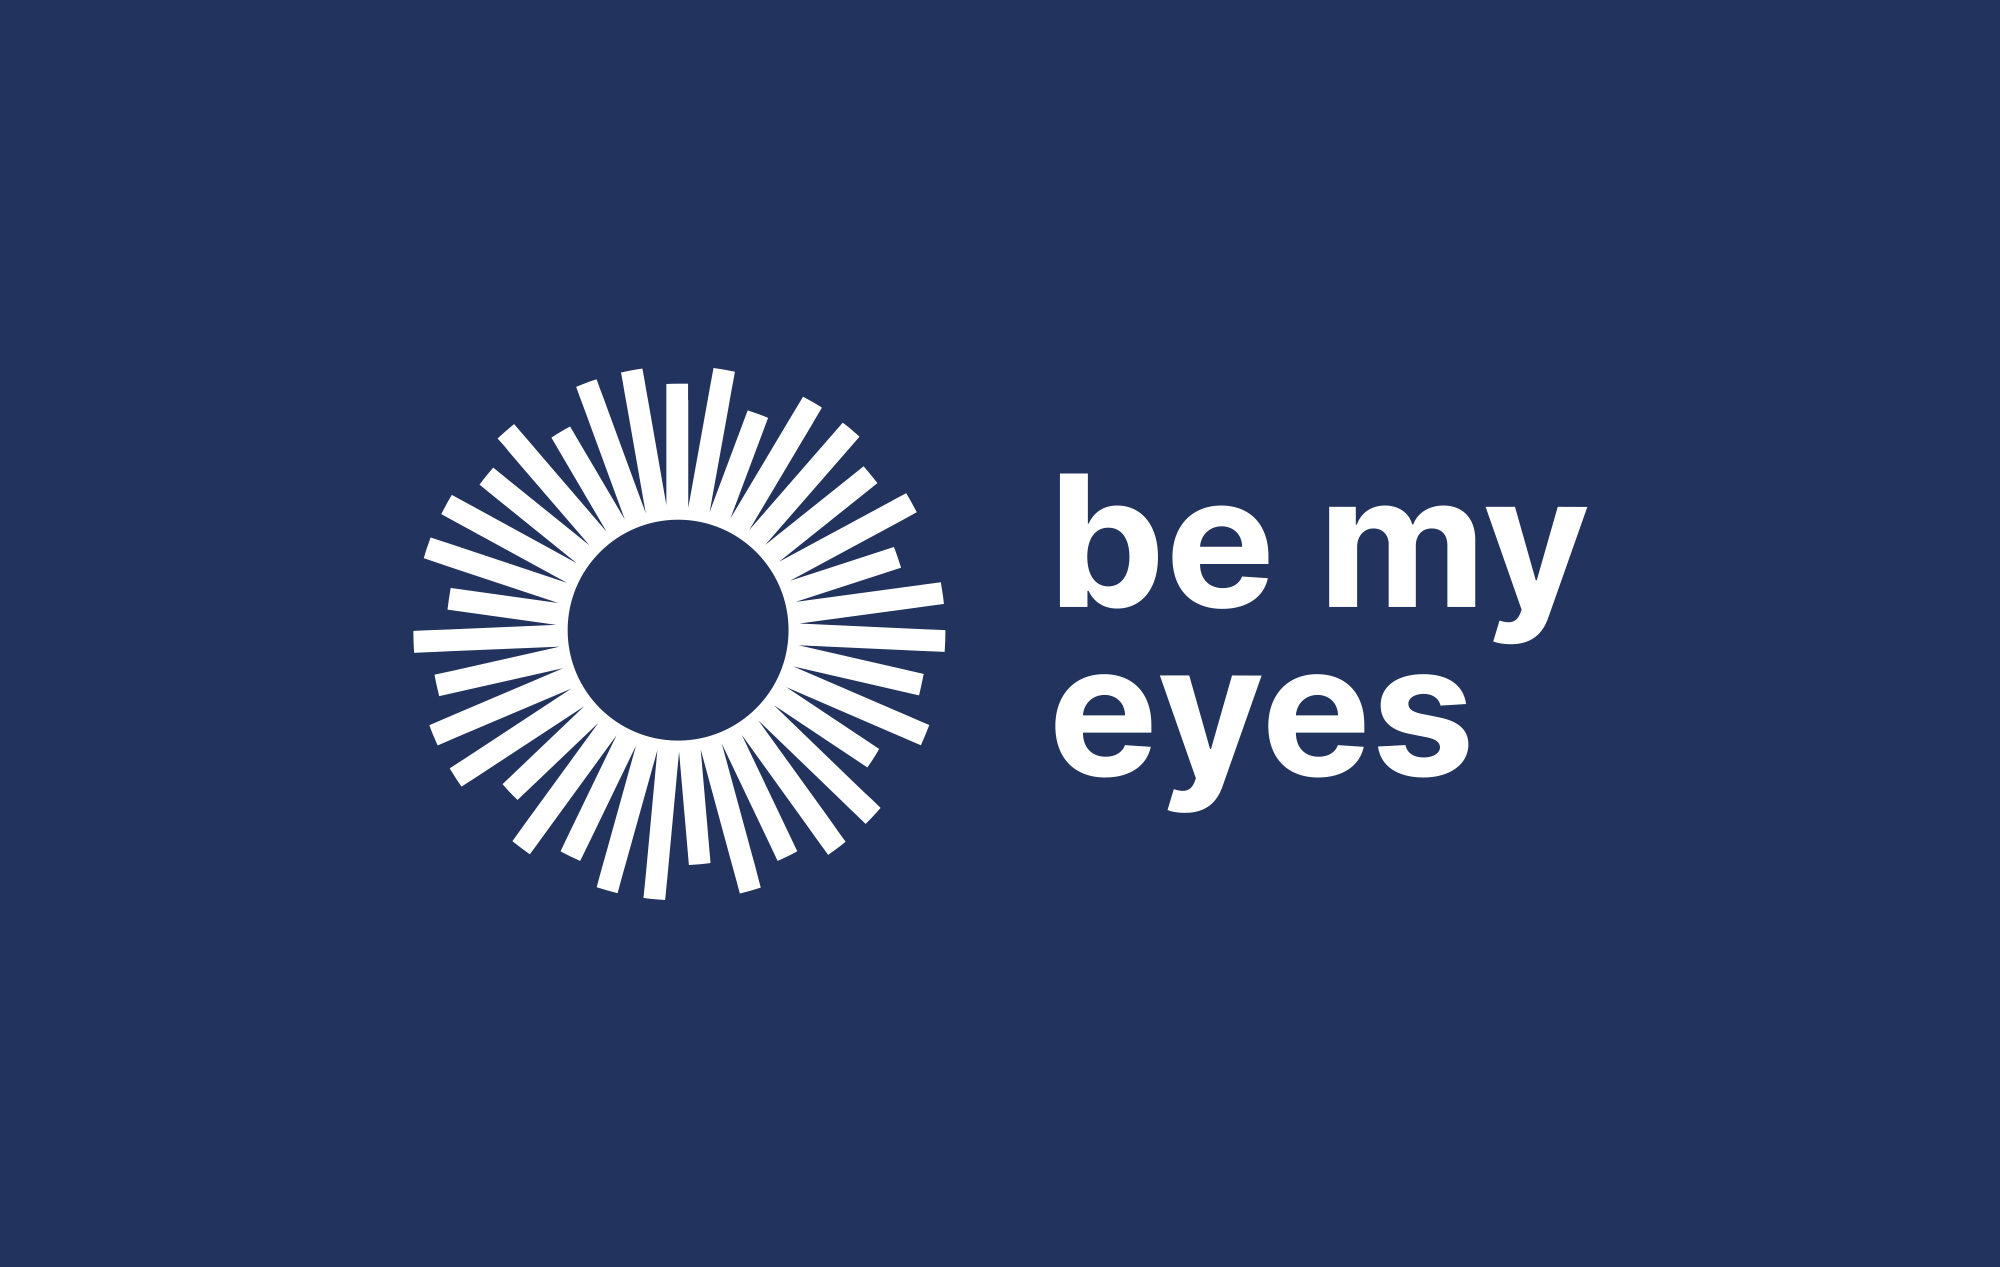 The Be My Eyes logo in white on a navy blue background.